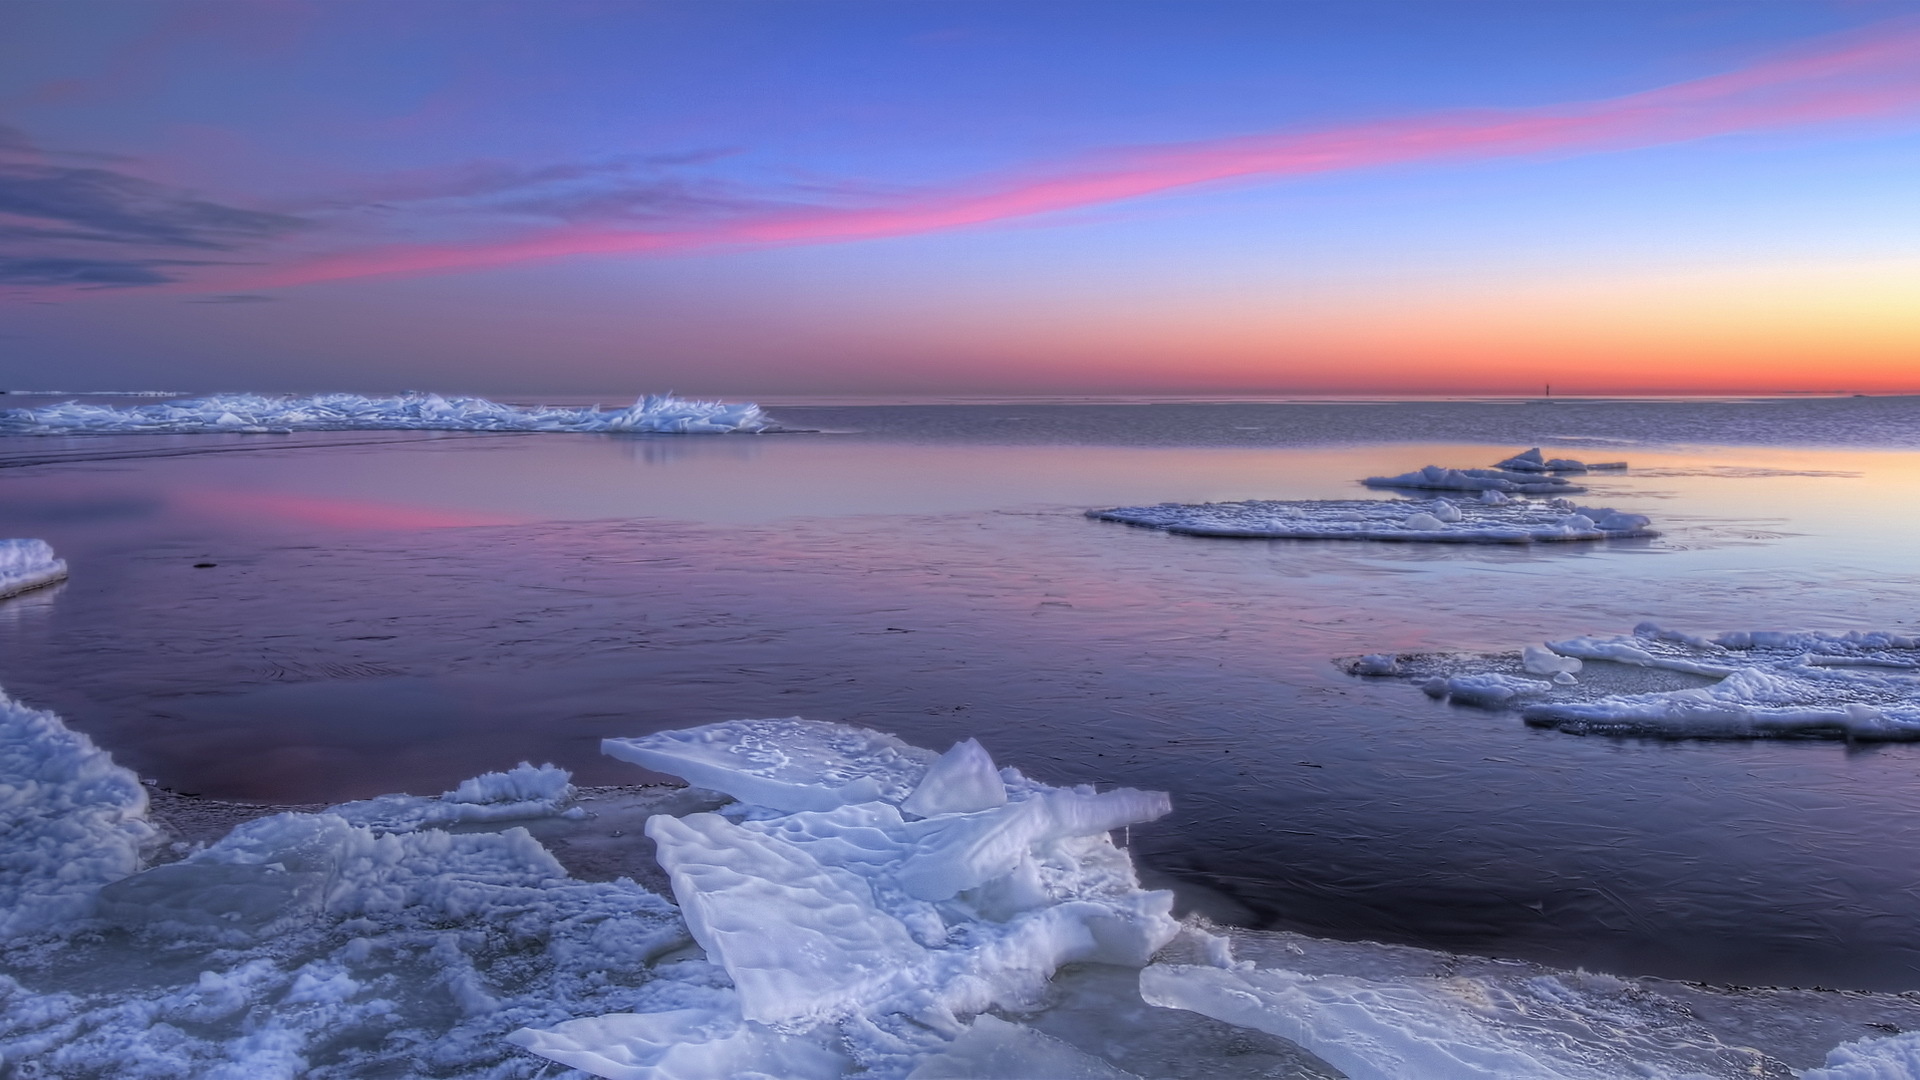 Ice HD Wallpaper | Background Image | 1920x1080 | ID ...